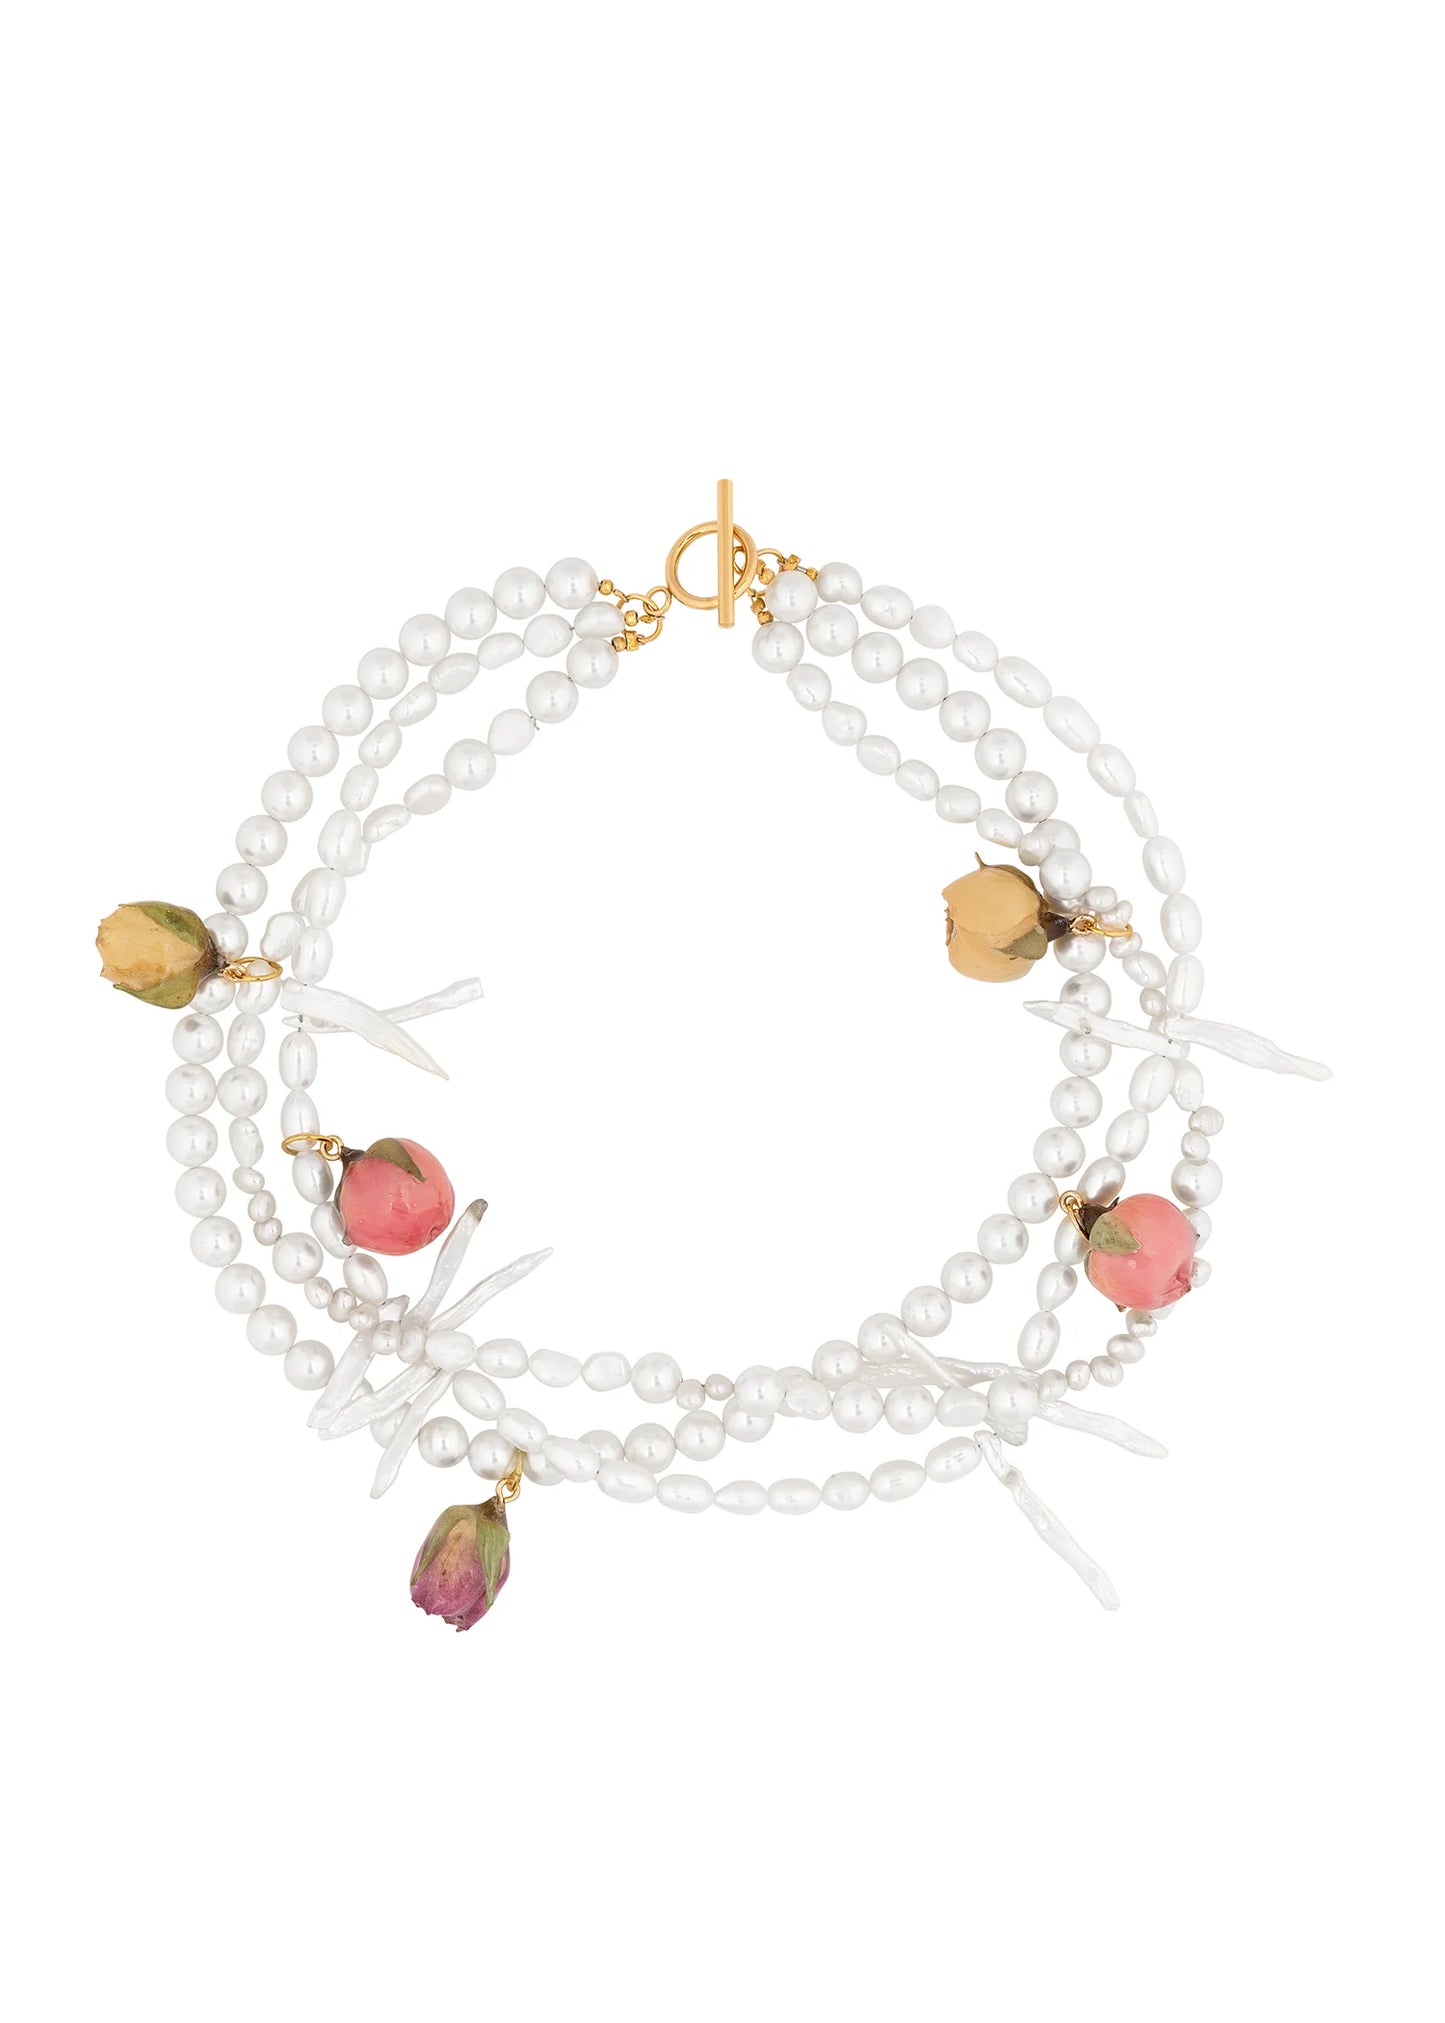 Dauphipnette - Rosewater Triple Strand Necklace: Ivory